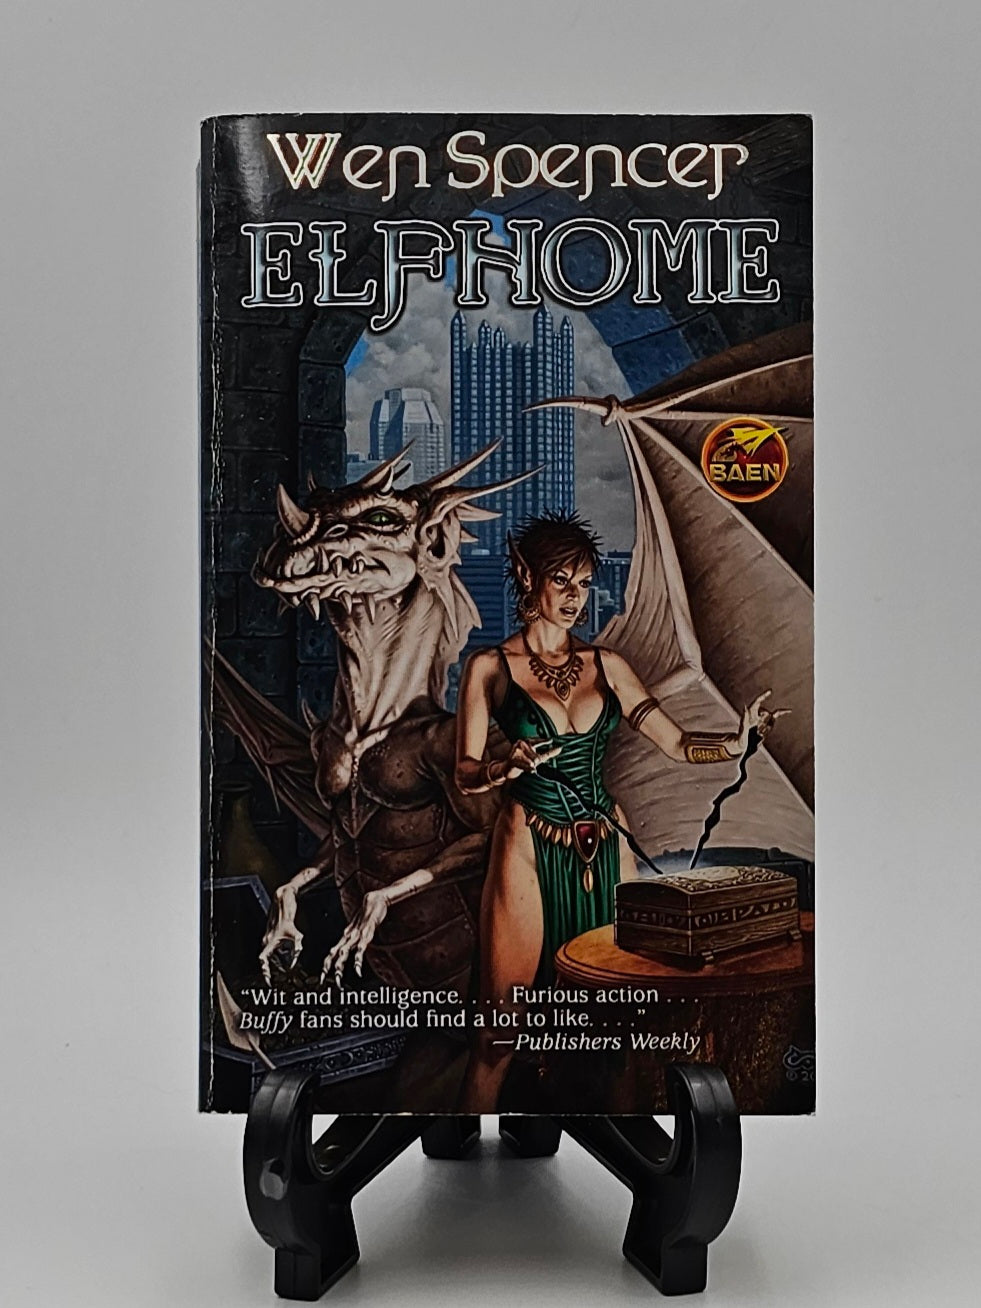 Elfhome By: Wen Spencer (Elfhome Series #3)